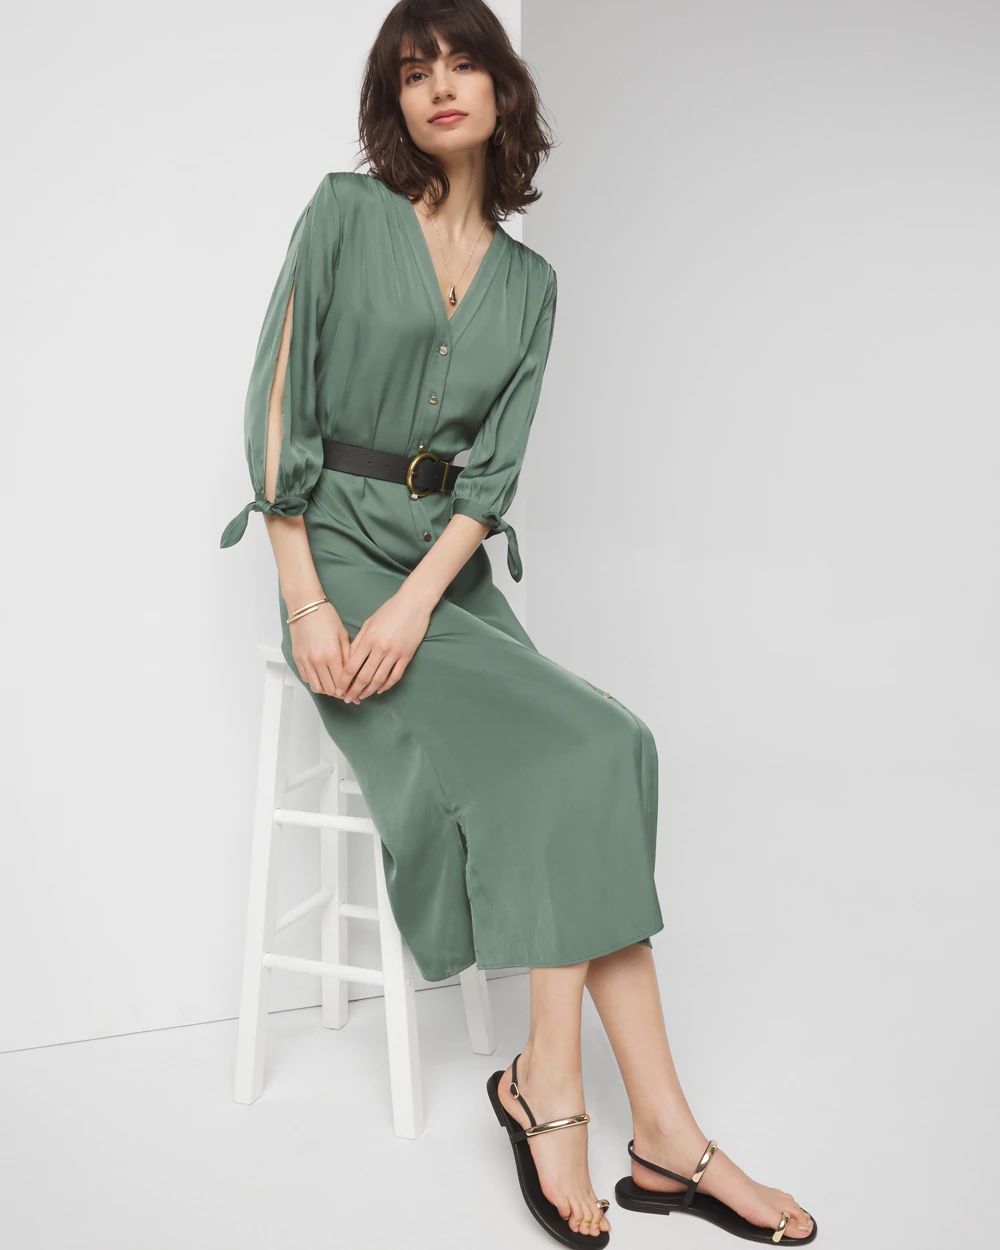 Cold Shoulder Belted Midi Dress click to view larger image.